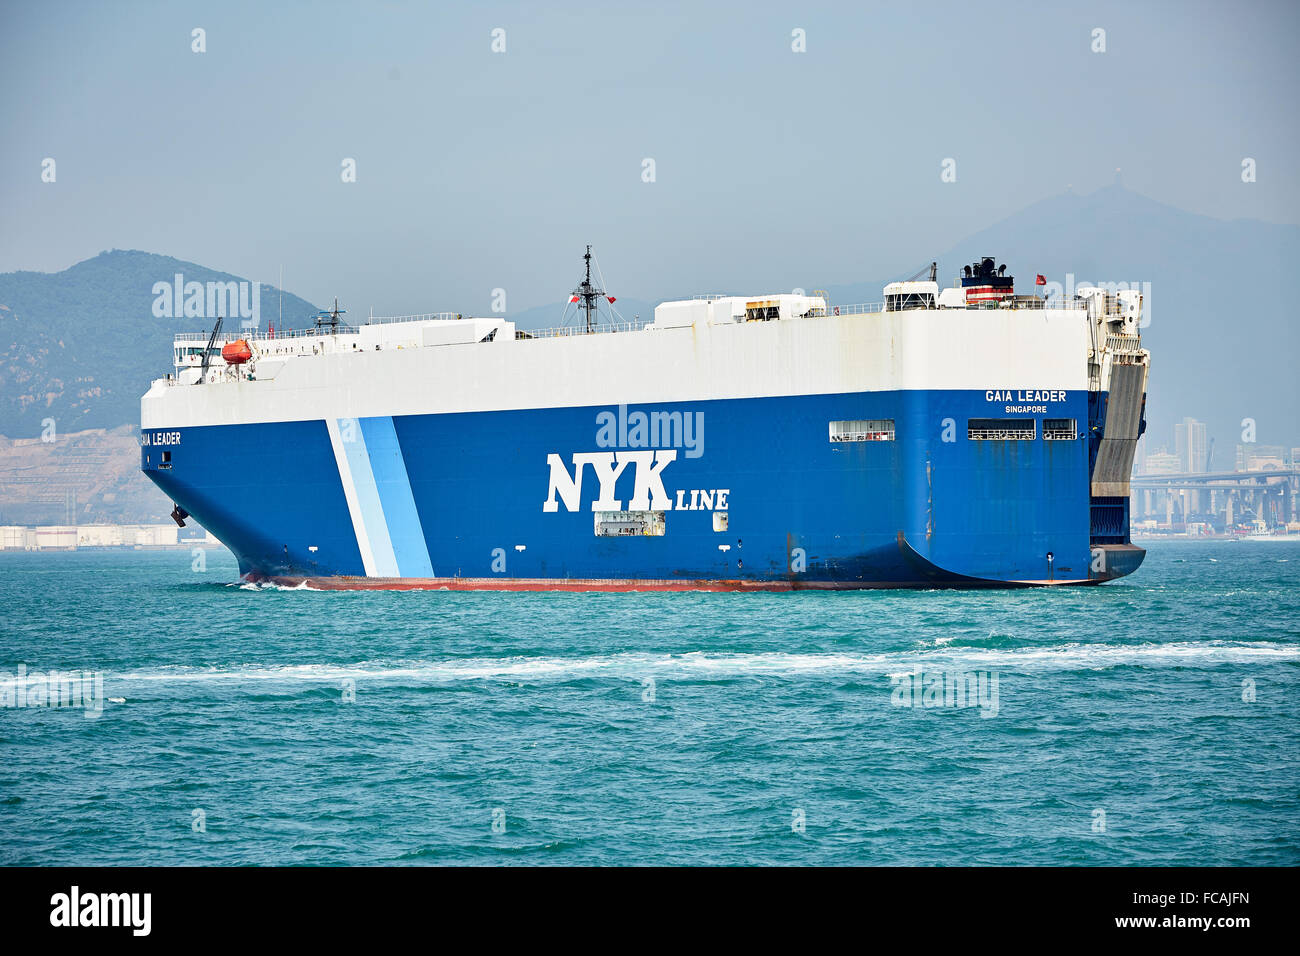 A RoRo ship carrying vehicles sails in the Lamma East Channel heading for the Tsing Yi container terminal in Hong Kong. Stock Photo